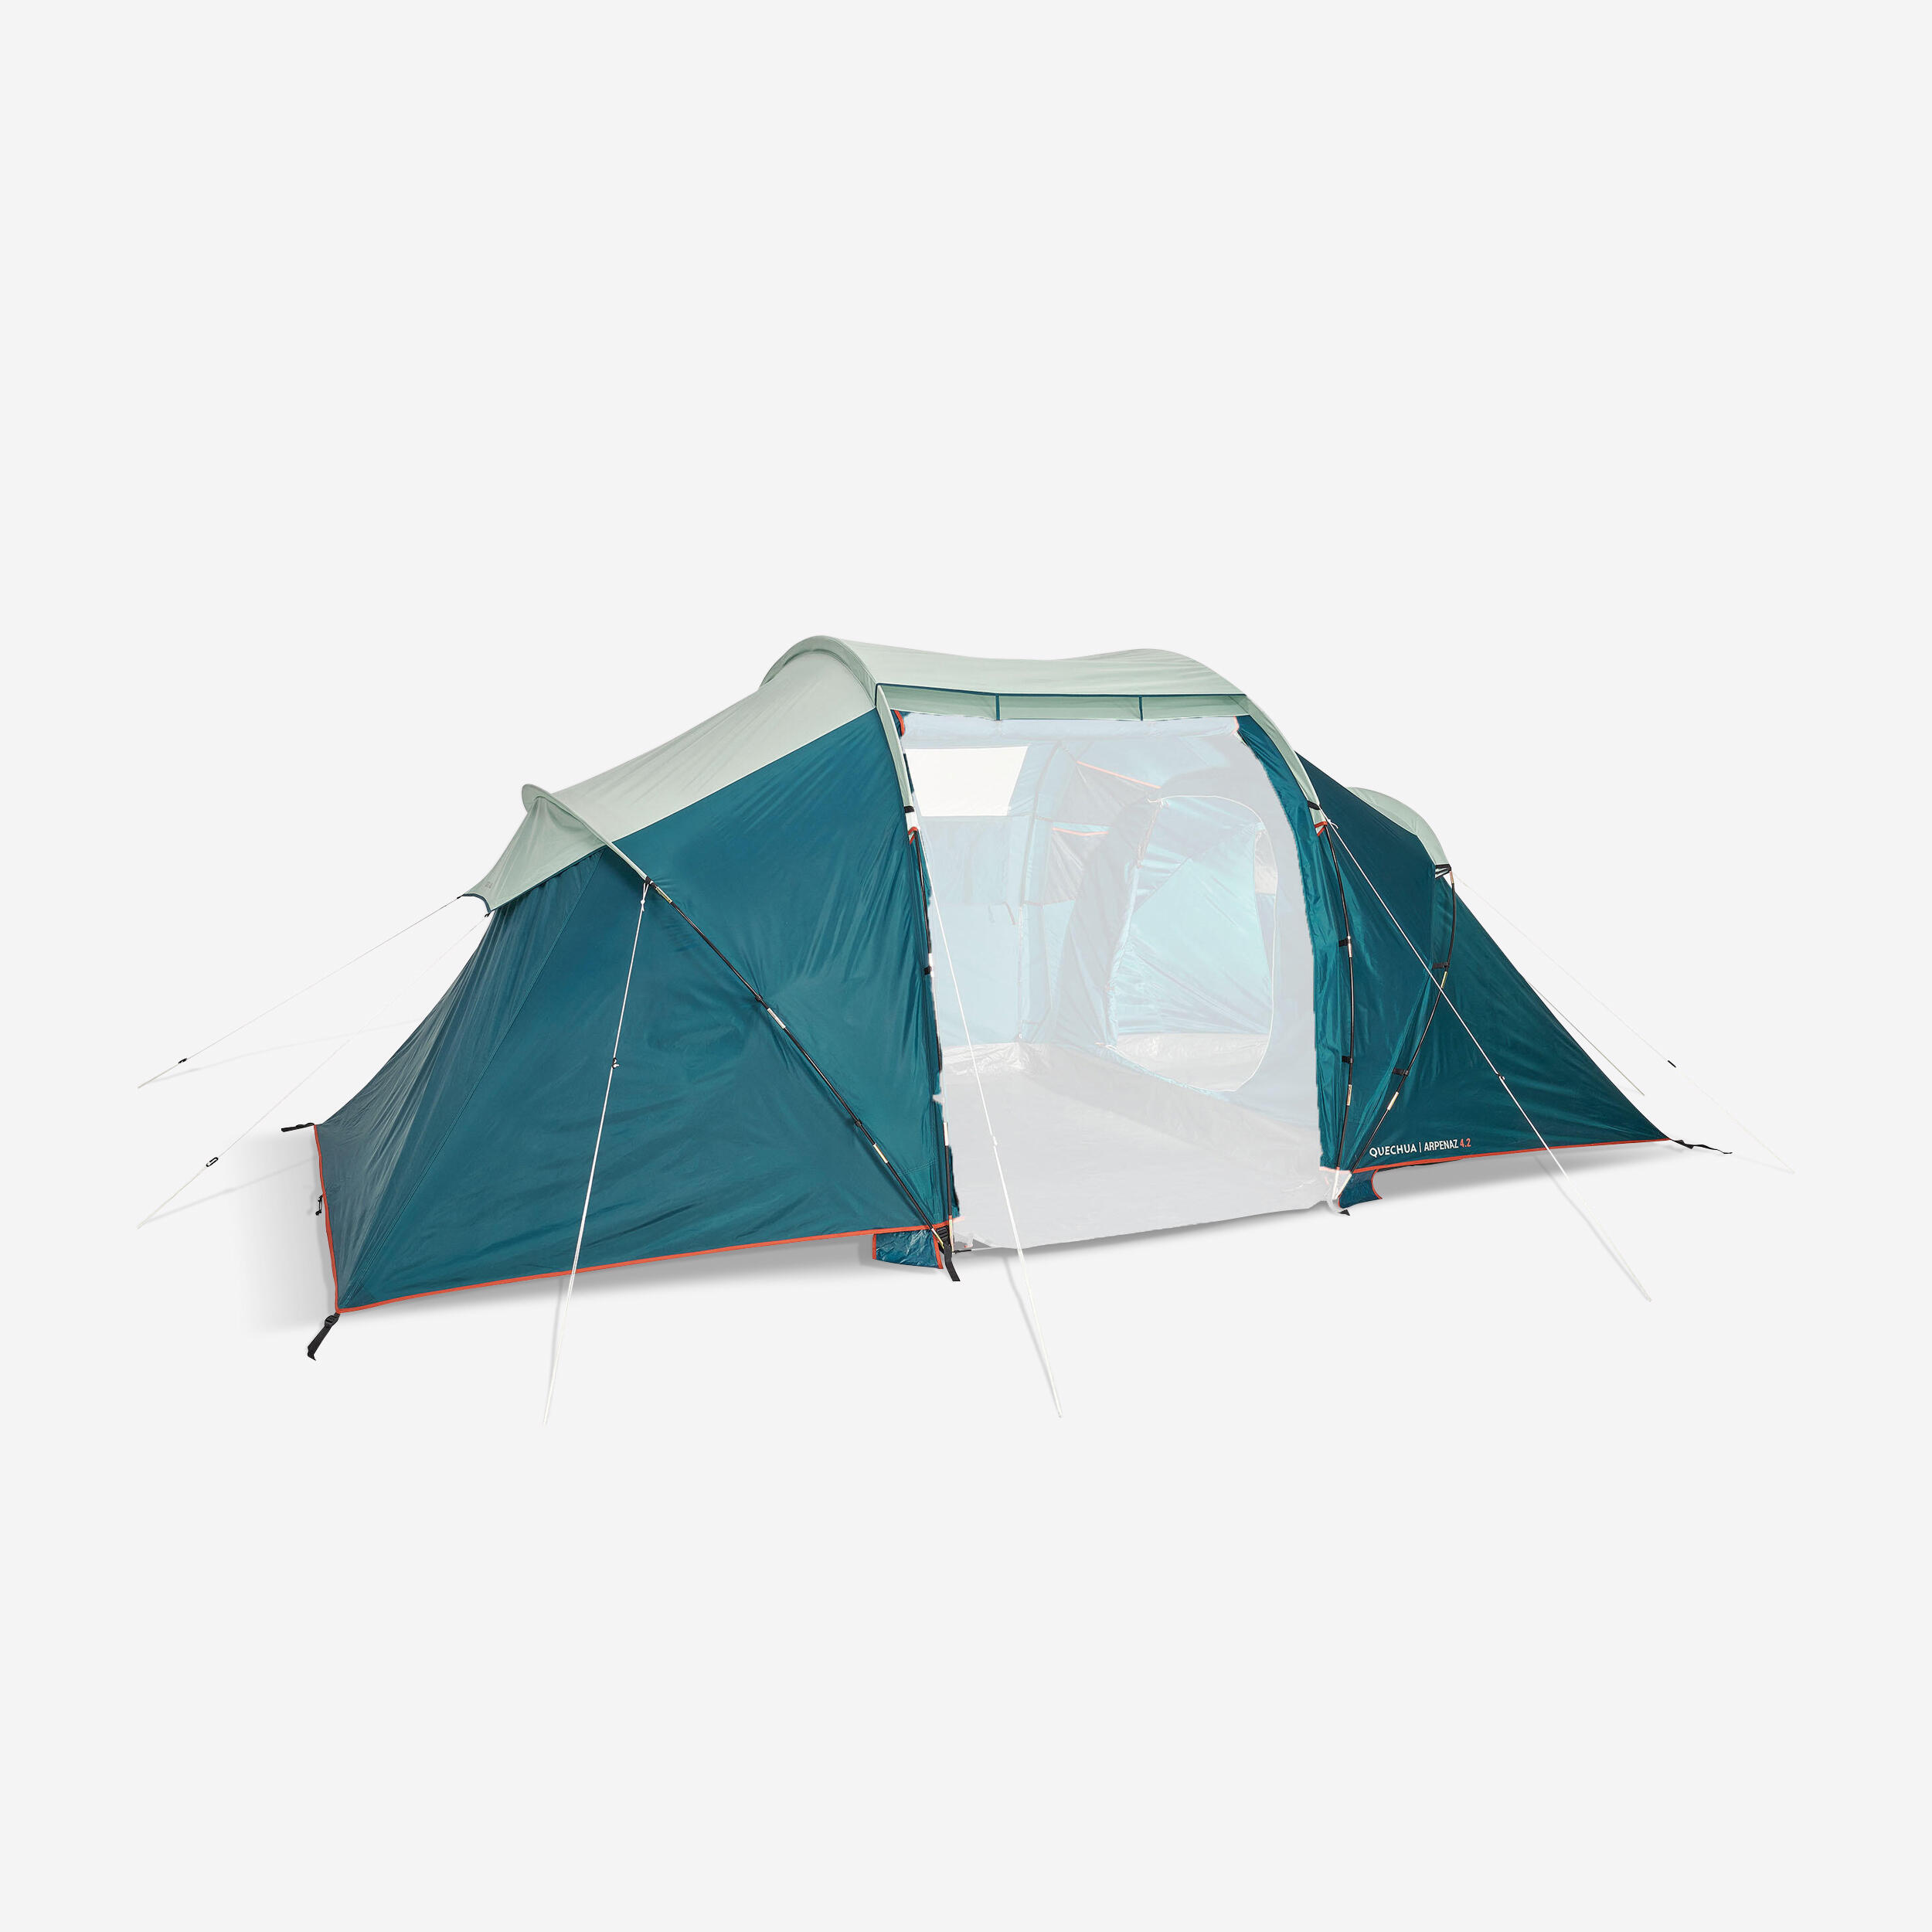 FLYSHEET - SPARE PART FOR THE ARPENAZ 4.2 TENT 1/3